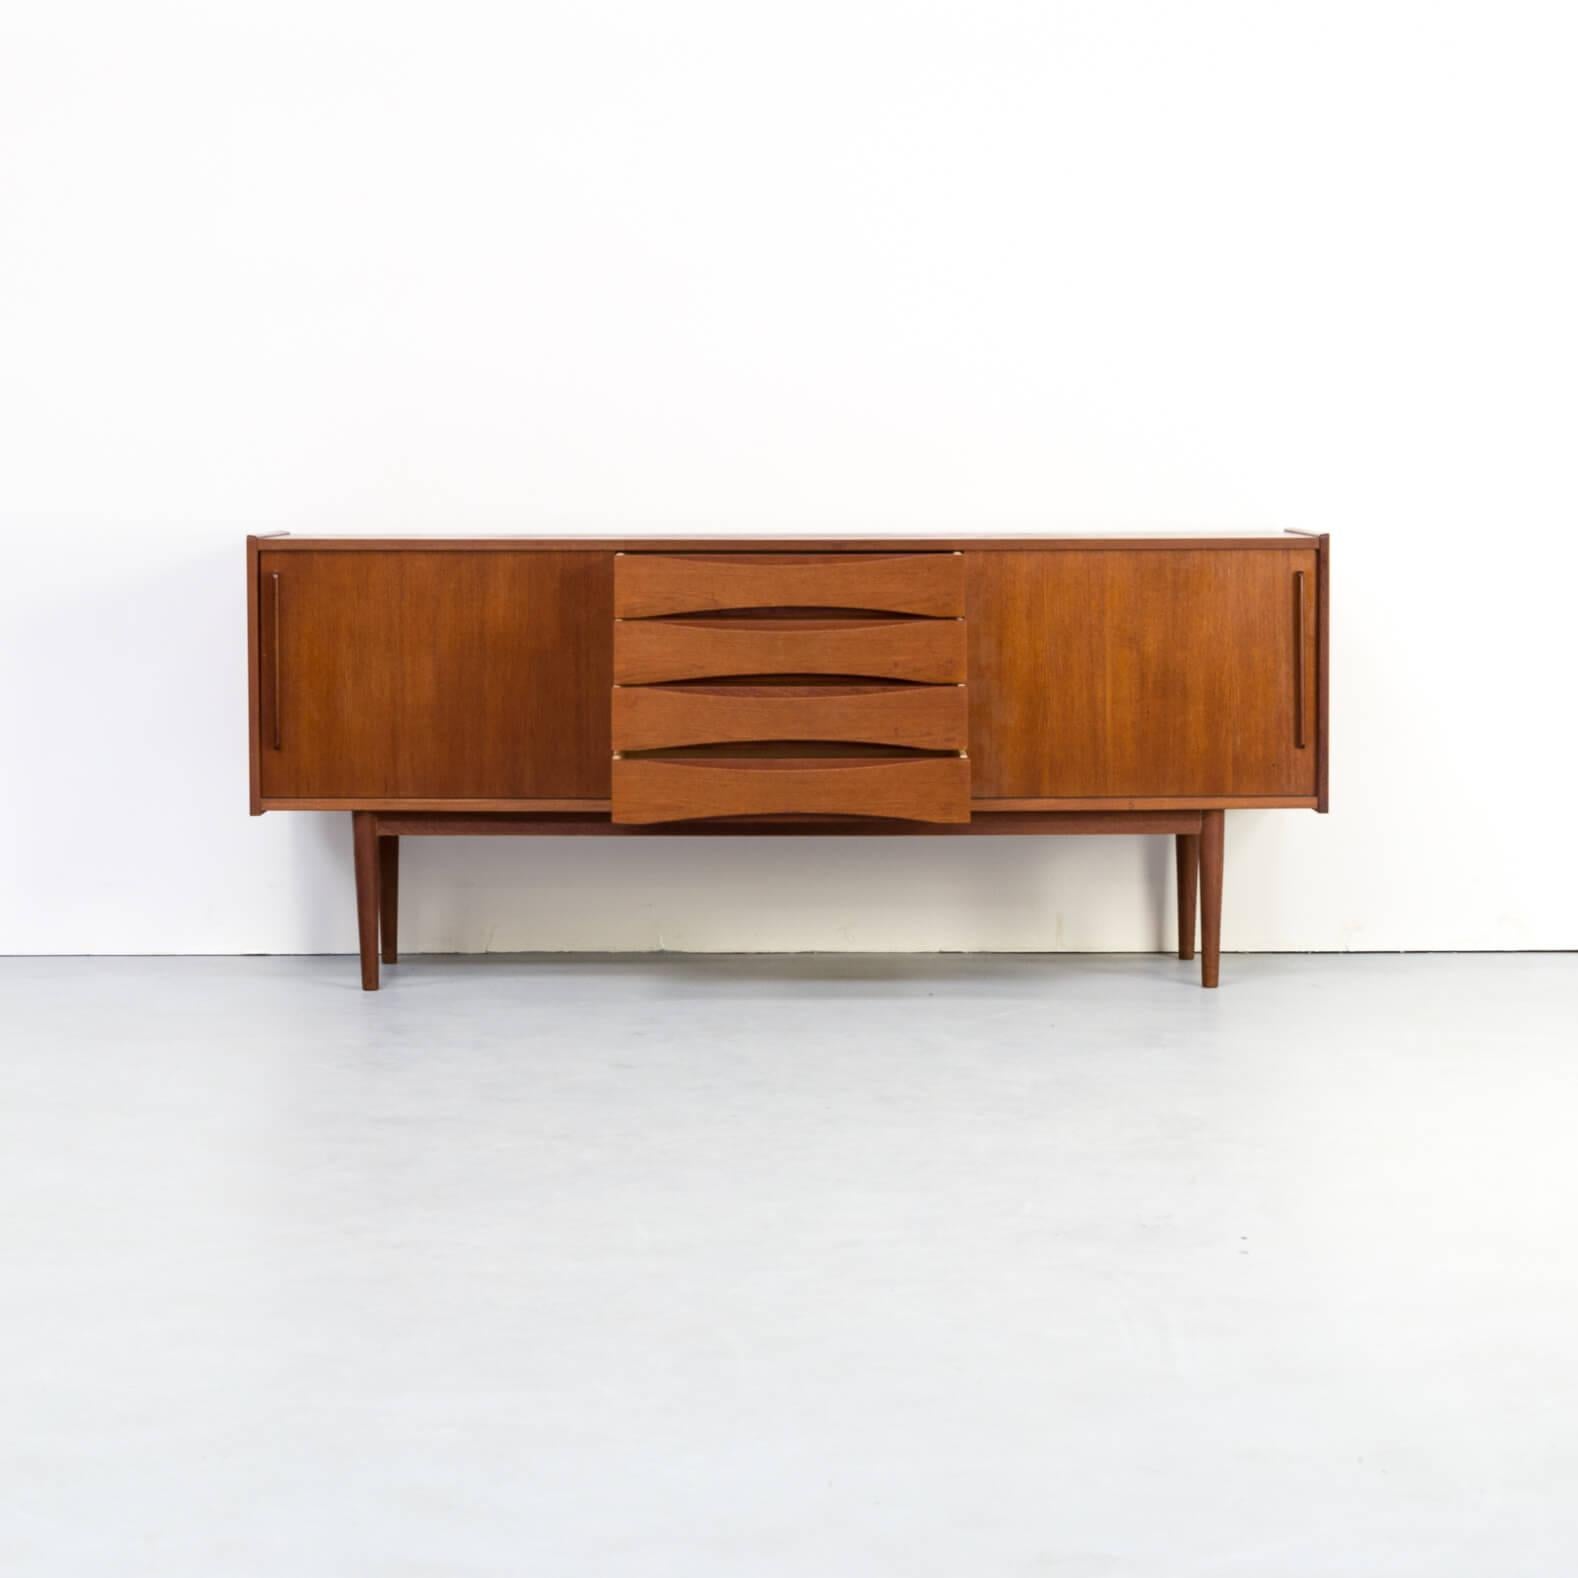 This midcentury teak veneer sideboard has a simple though strong design. Two sliding doors and 4 drawers. It is in very good condition consistent with age and use.